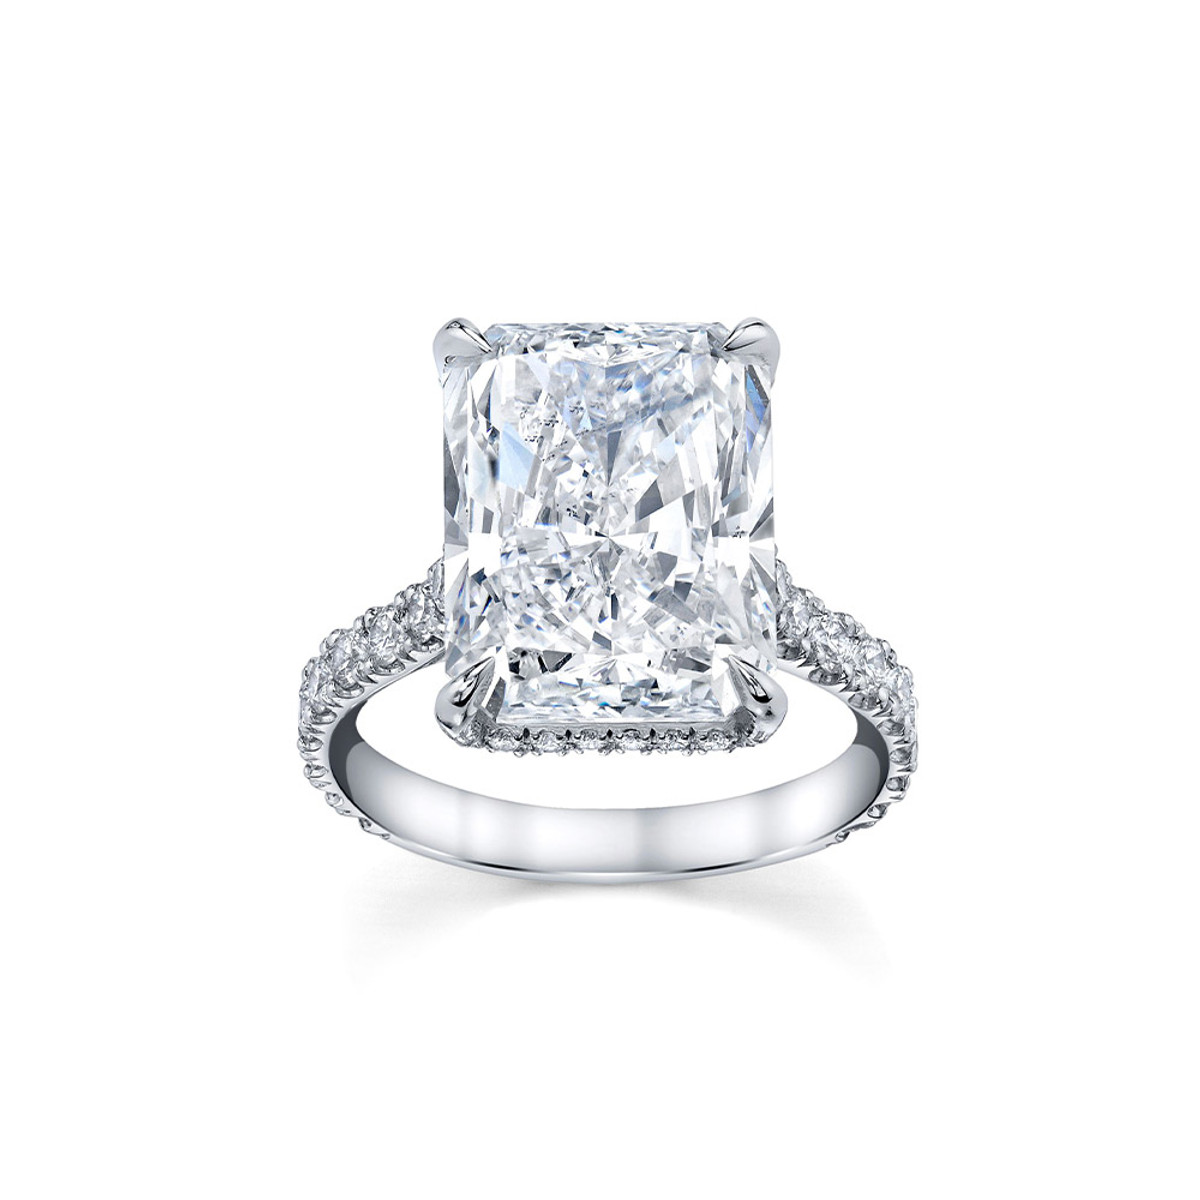 Hyde Park Collection Platinum Radiant Diamond Engagement Ring-39387 Product Image